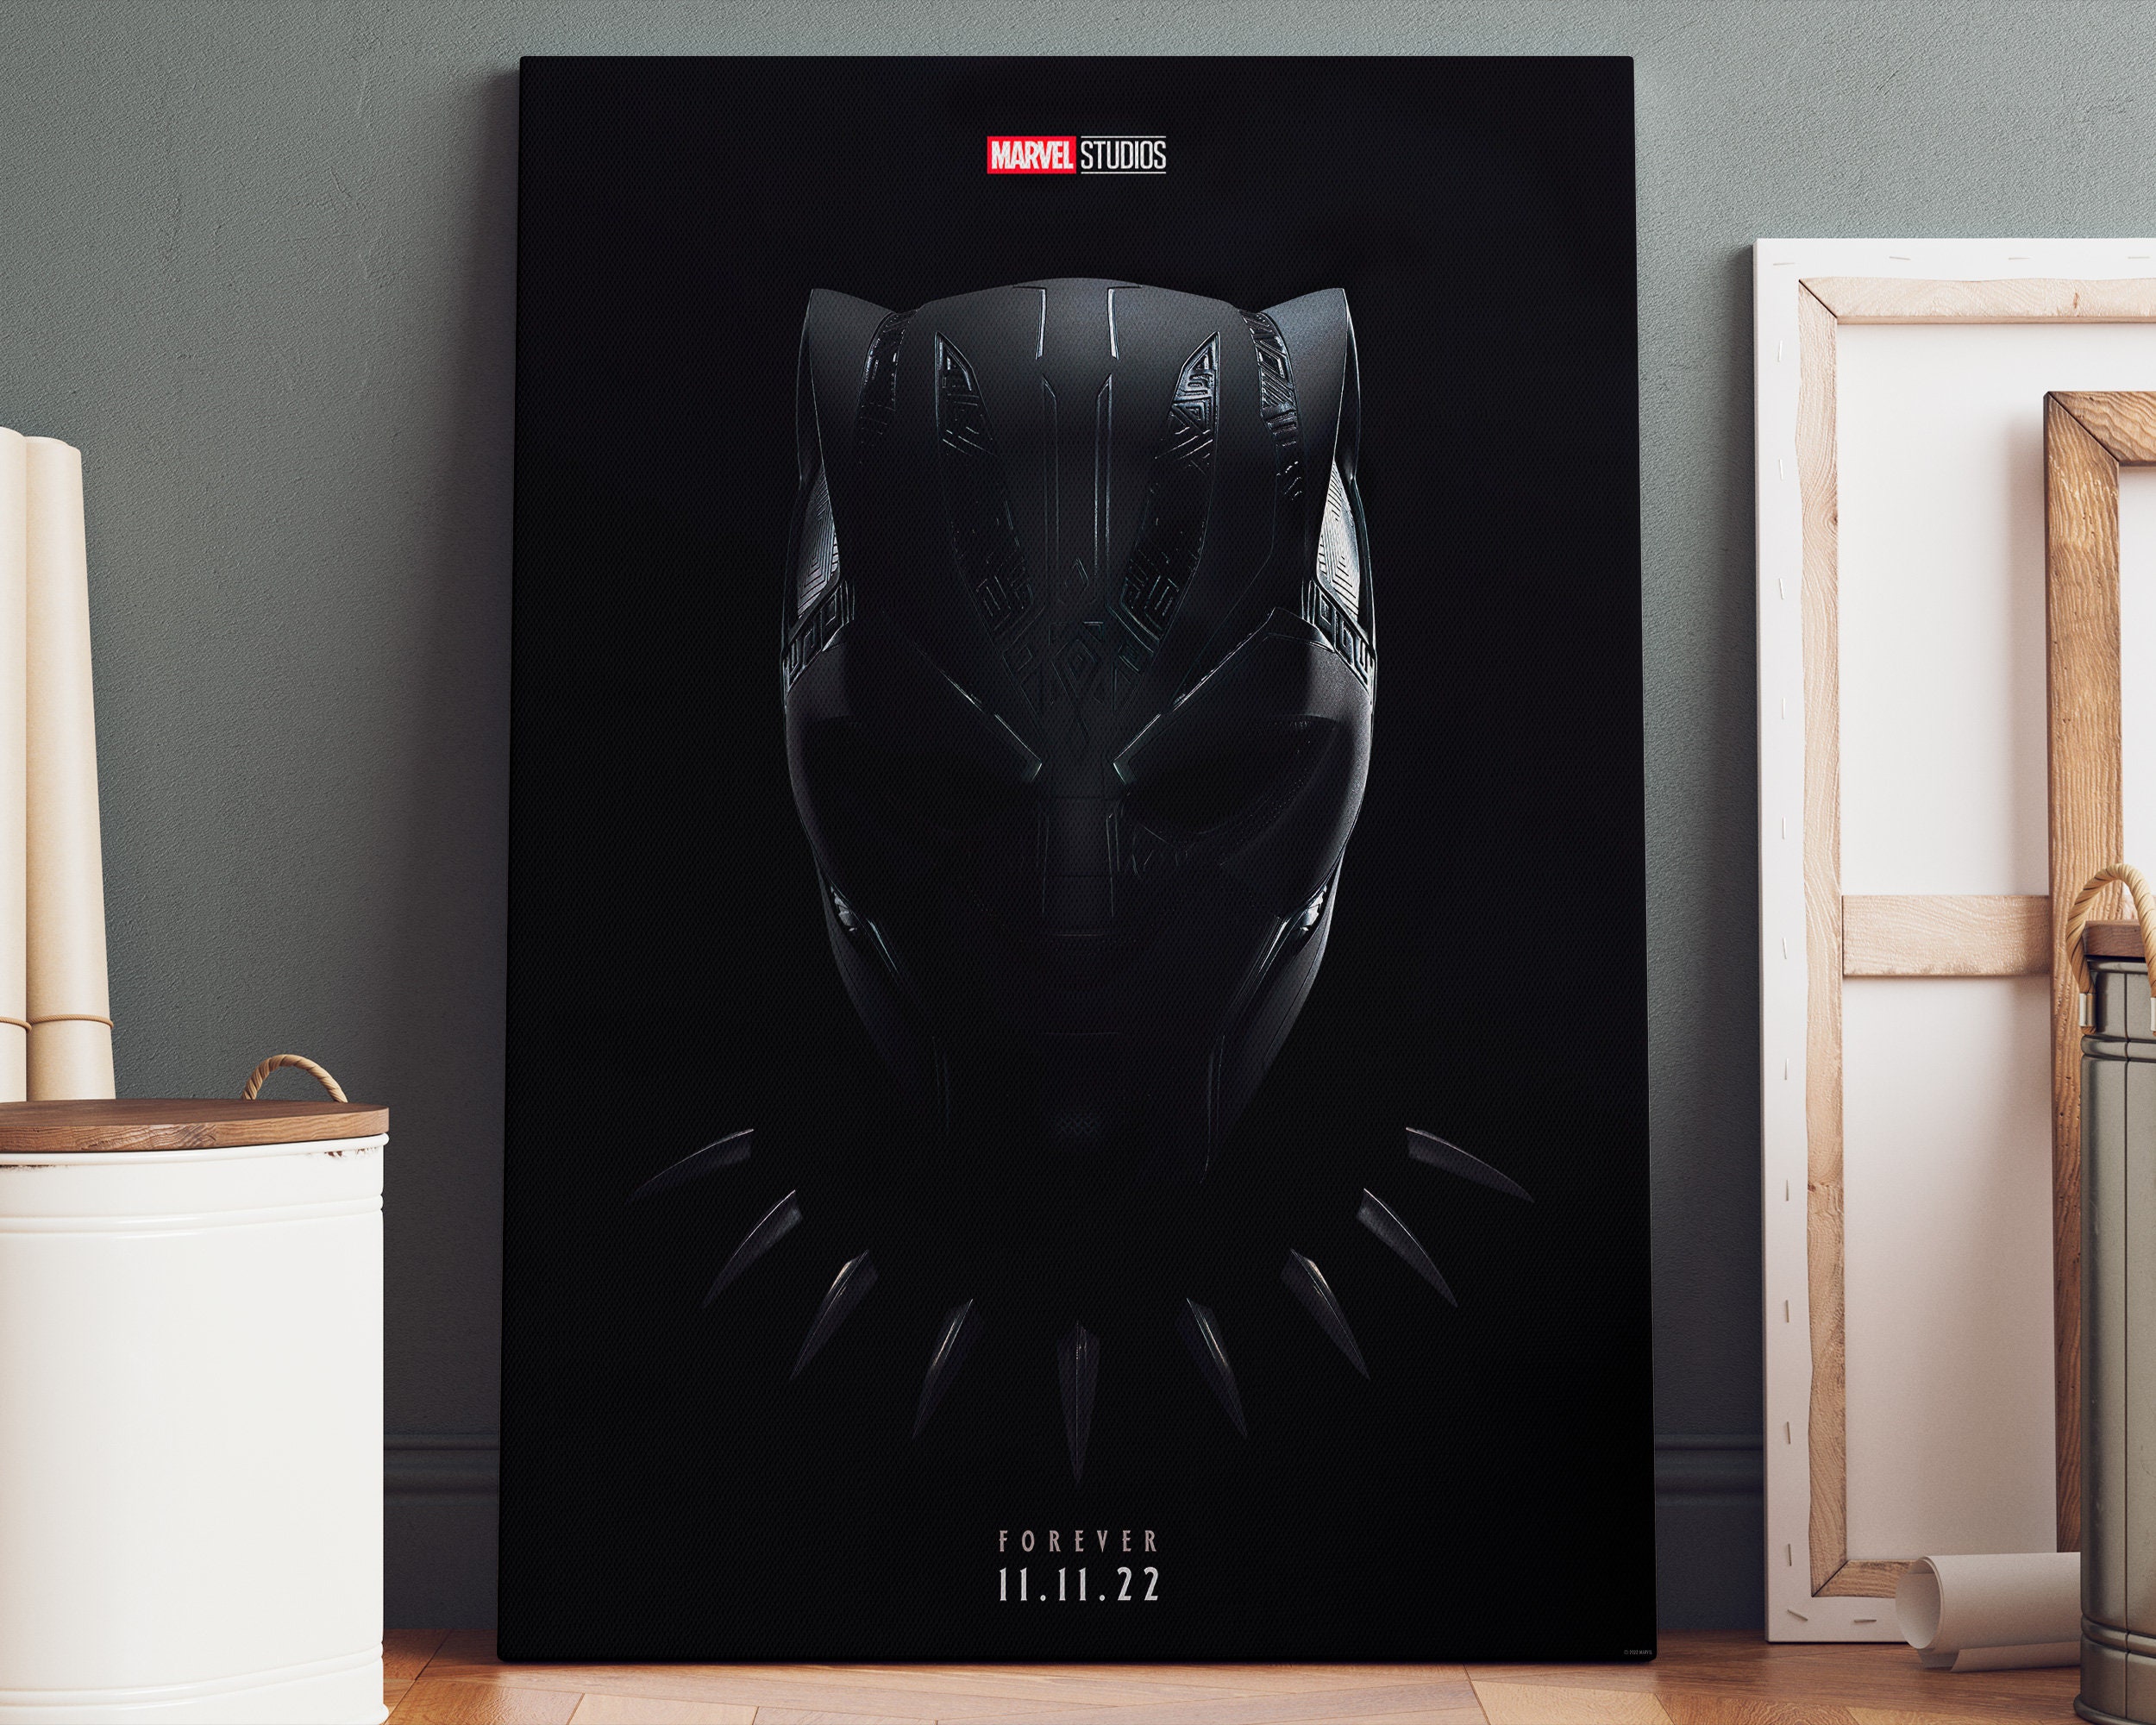 Marvel Black Panther Wakanda Forever Wall Decals 114-piece Set by